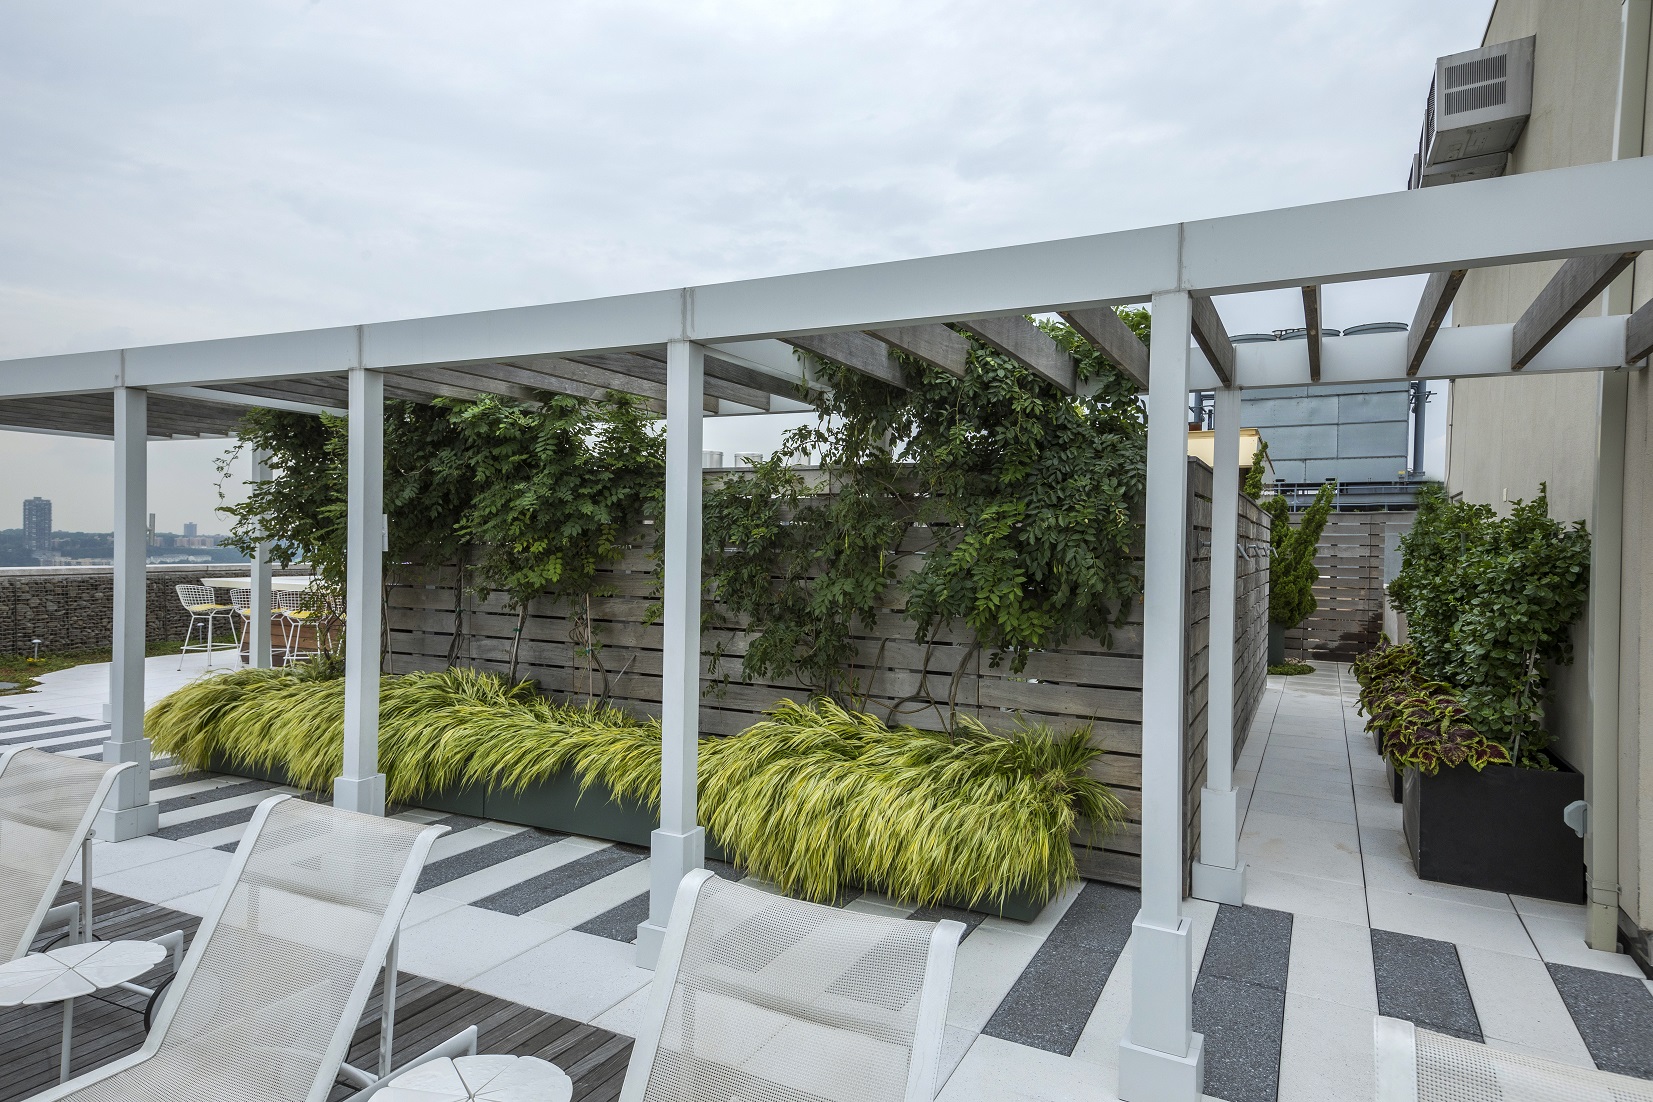 Expertly maintained specimen trees mix with perennials to encompass this sizeable outdoor rooftop, providing entertainment area